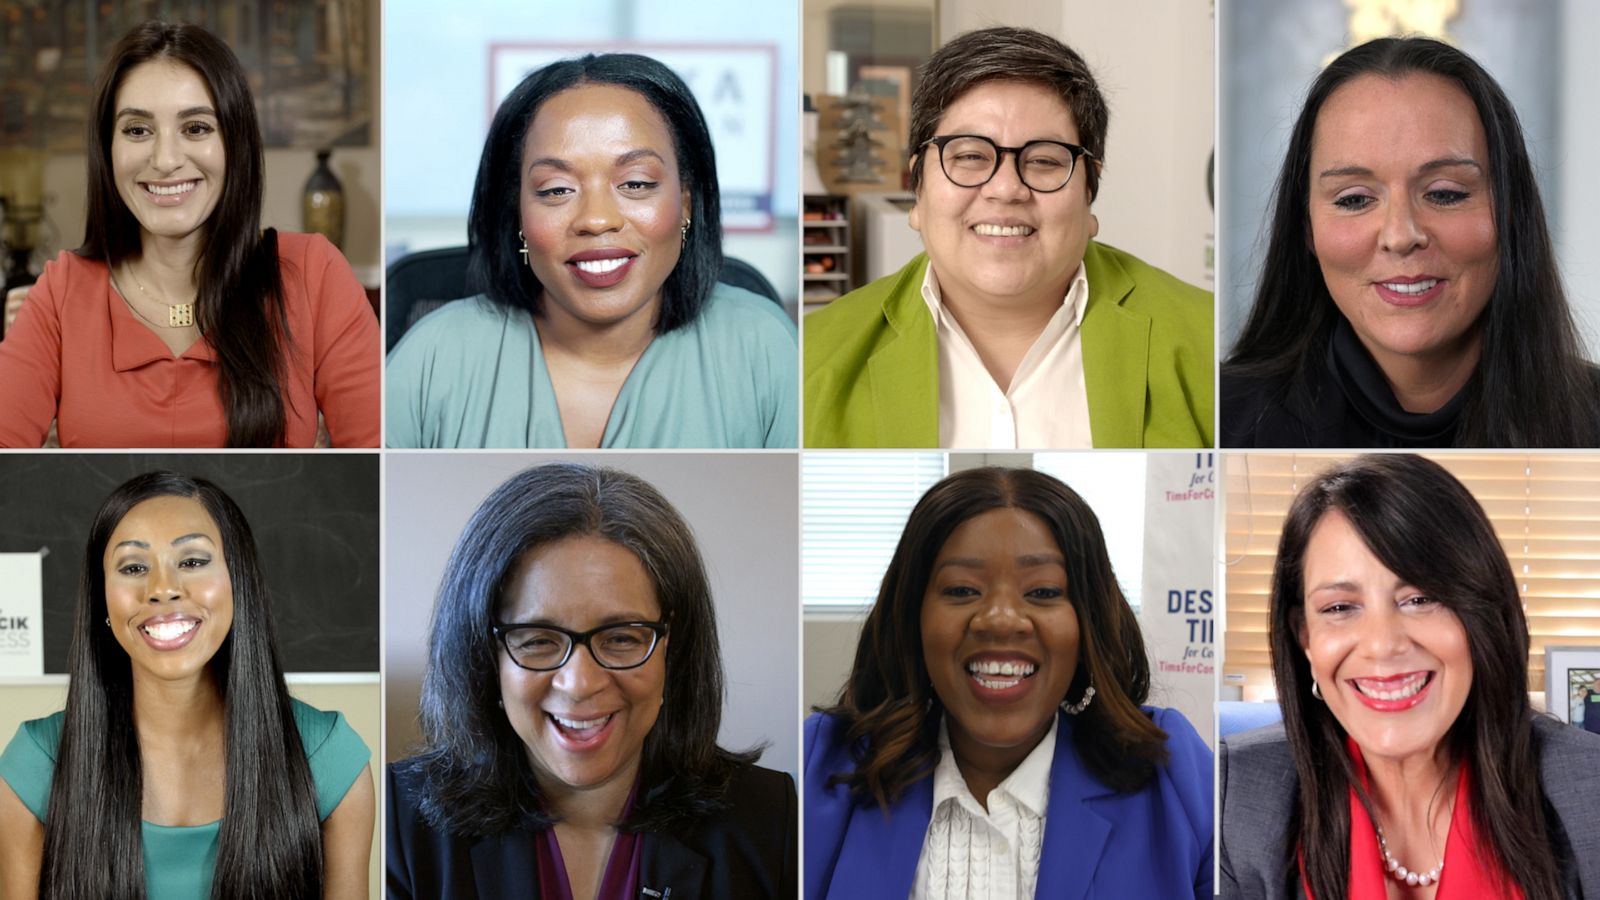 VIDEO: A candid conversation with eight women of color running for Congress this year